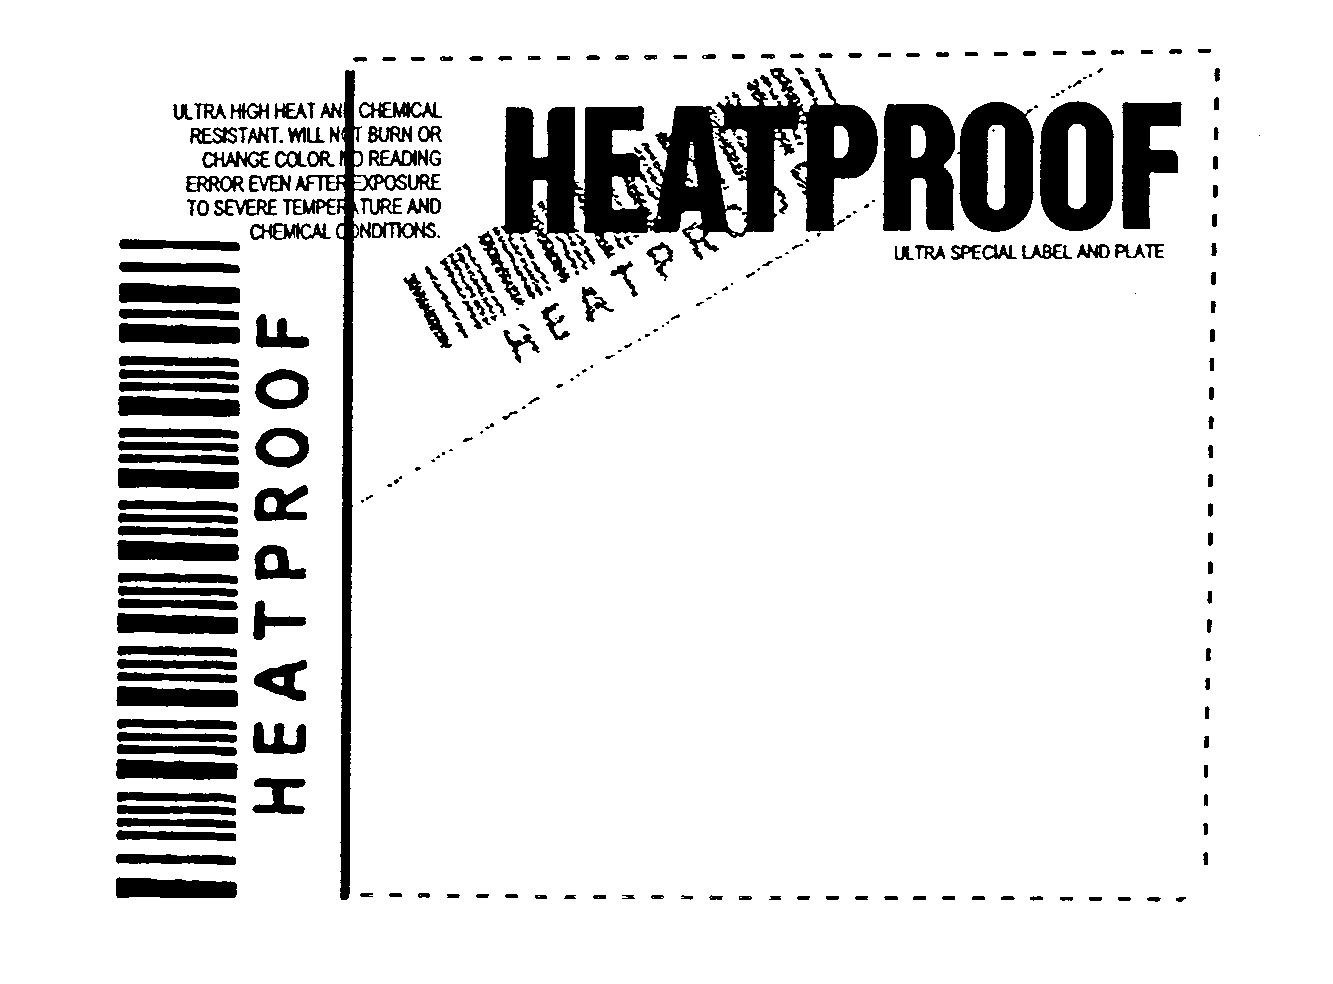  HEATPROOF ULTRA SPECIAL LABEL AND PLATE ULTRA HIGH HEAT AND CHEMICAL RESISTANT. WILL NOT BURN OR CHANG COLOR. NO READING ERROR EVEN AFTER EXPOSURE TO SEVERE TEMPERATURE AND CHEMICAL CONDITIONS. HEATPROOF